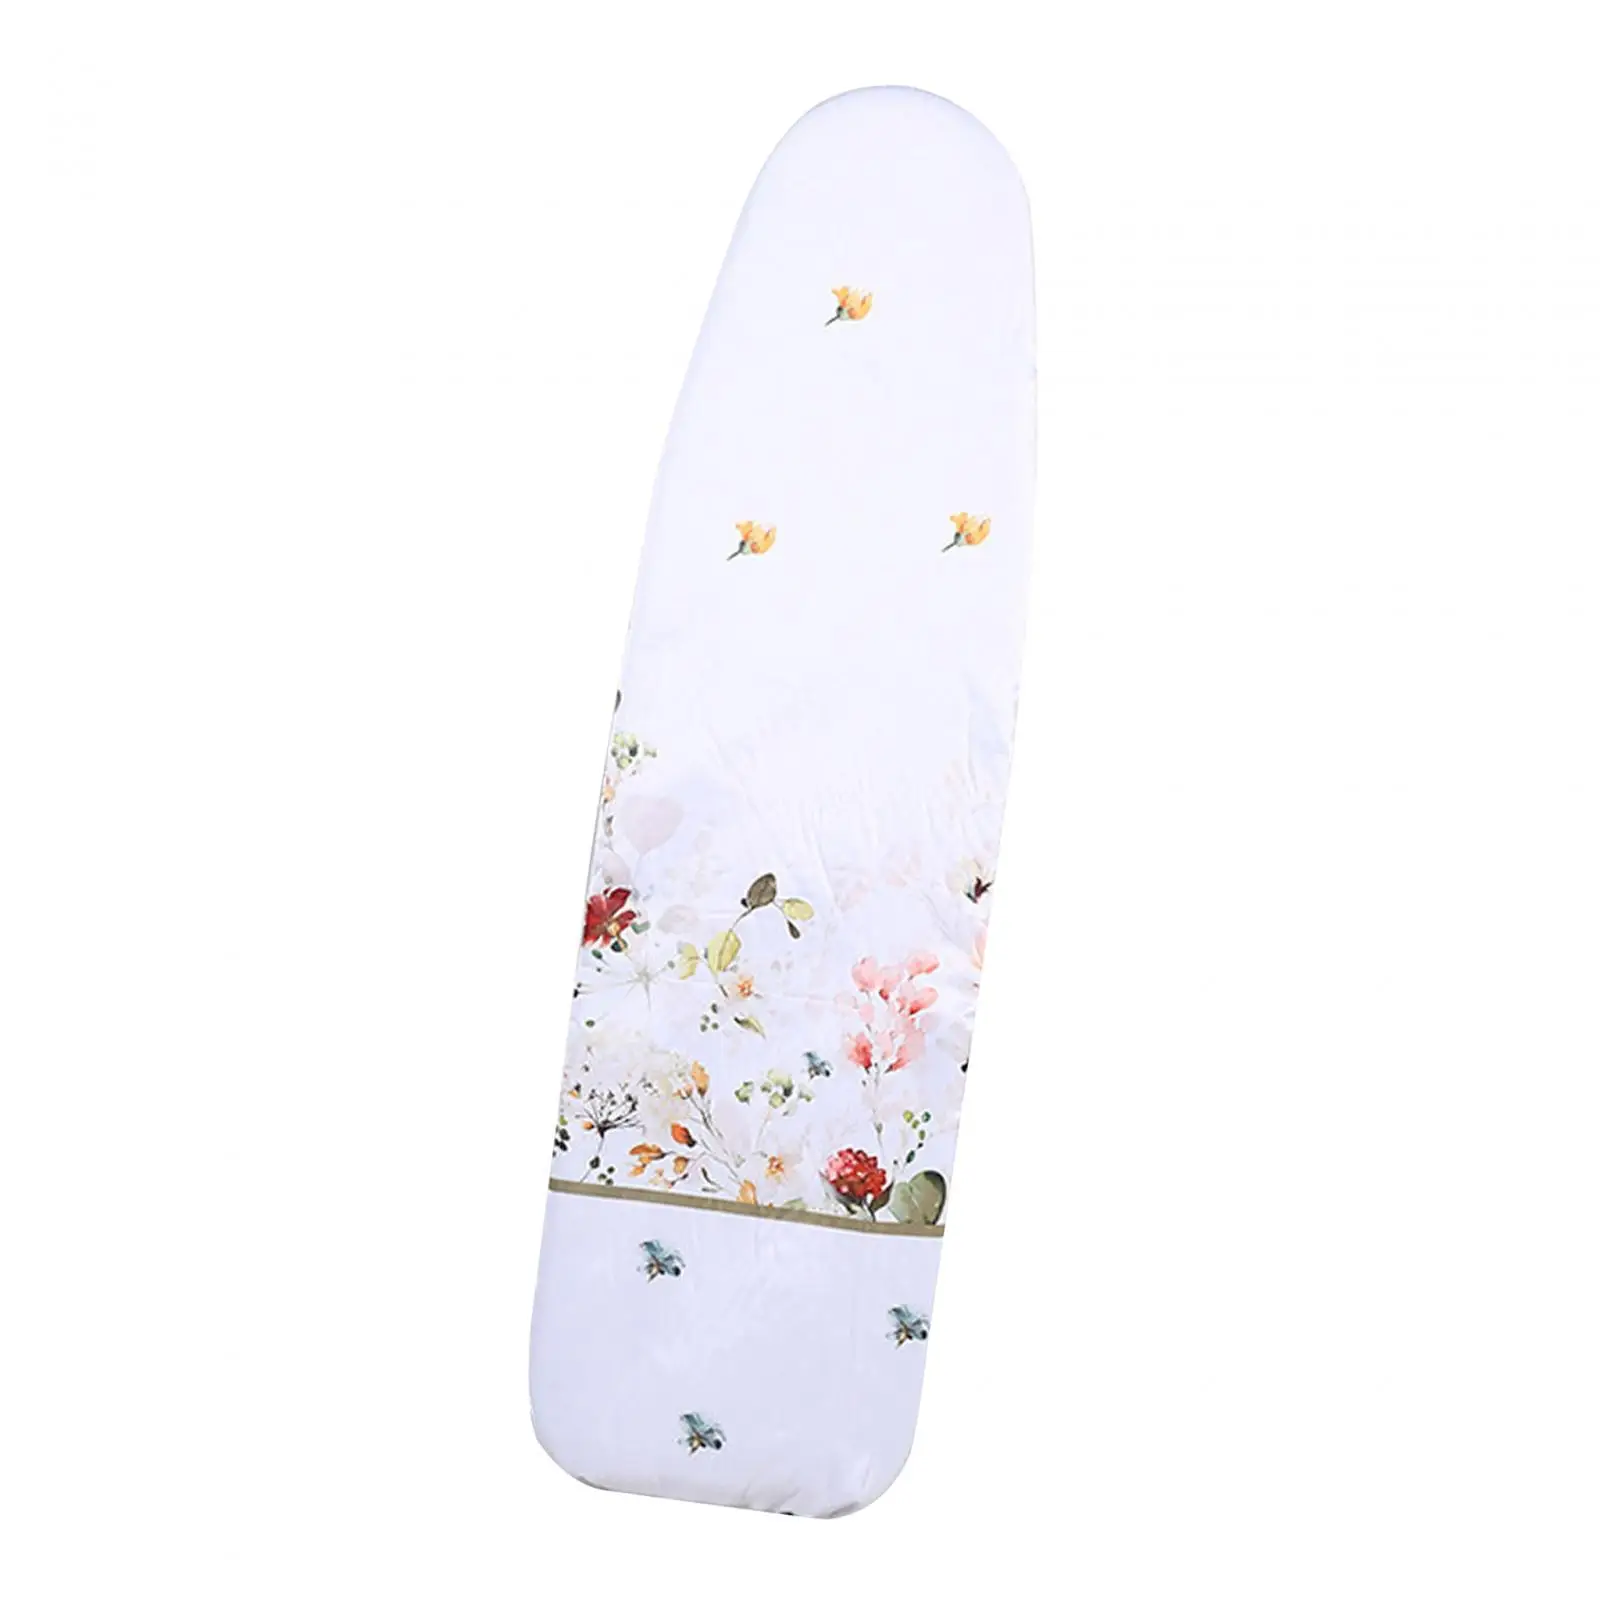 Ironing Board Cover Thick Protective Organizer Cover Heat Resistant Cover Portable Ironing Board Protective Cover Iron Pad Cover